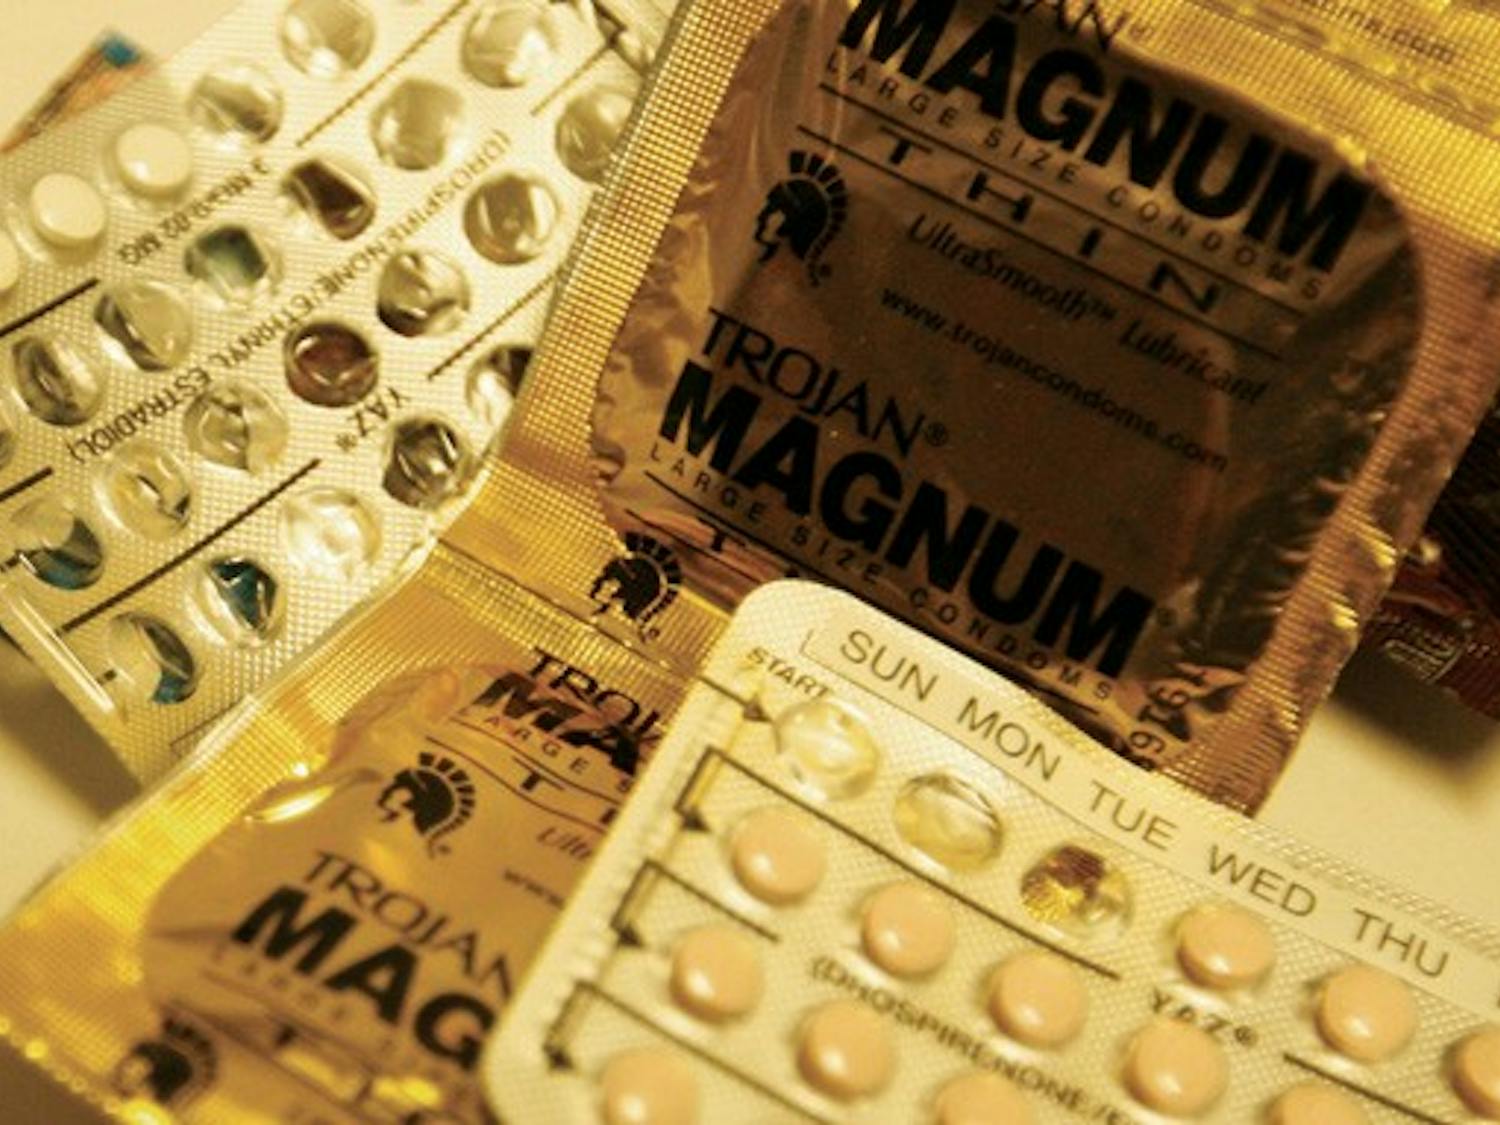 A Spring 2009 survey on Duke undergraduates found that 70 percent used a male condom the last time they had sex, and 46 percent used both a condom and another form of birth control.